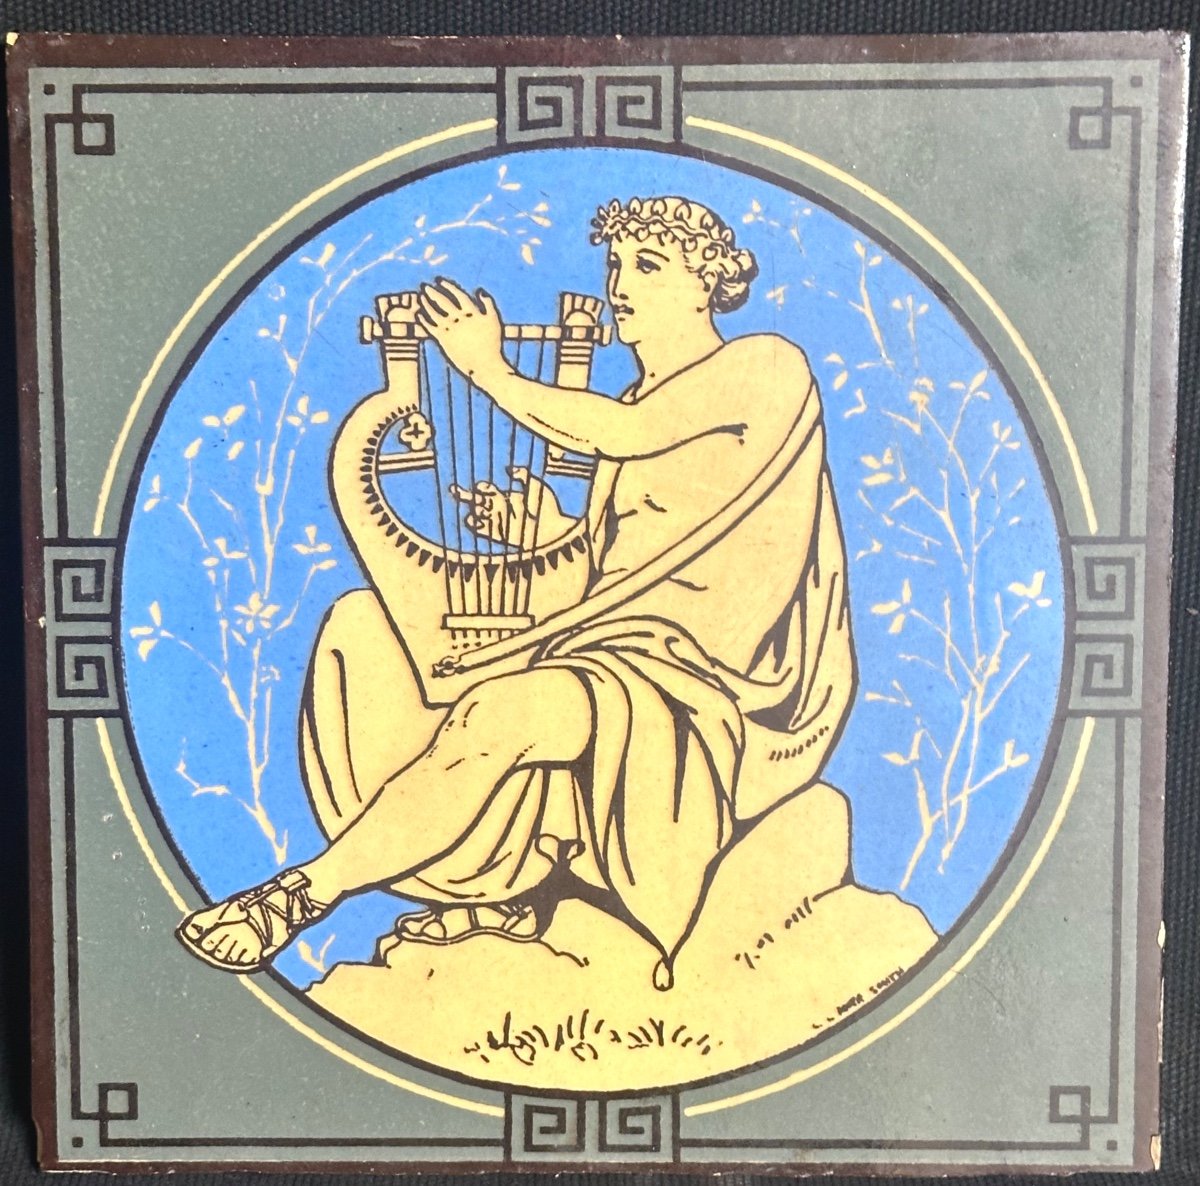 Minton Pair Of Earthenware Tiles Signed Moyr Smith 1839-1912 Mintons Stroke Upon Trent Music-photo-3